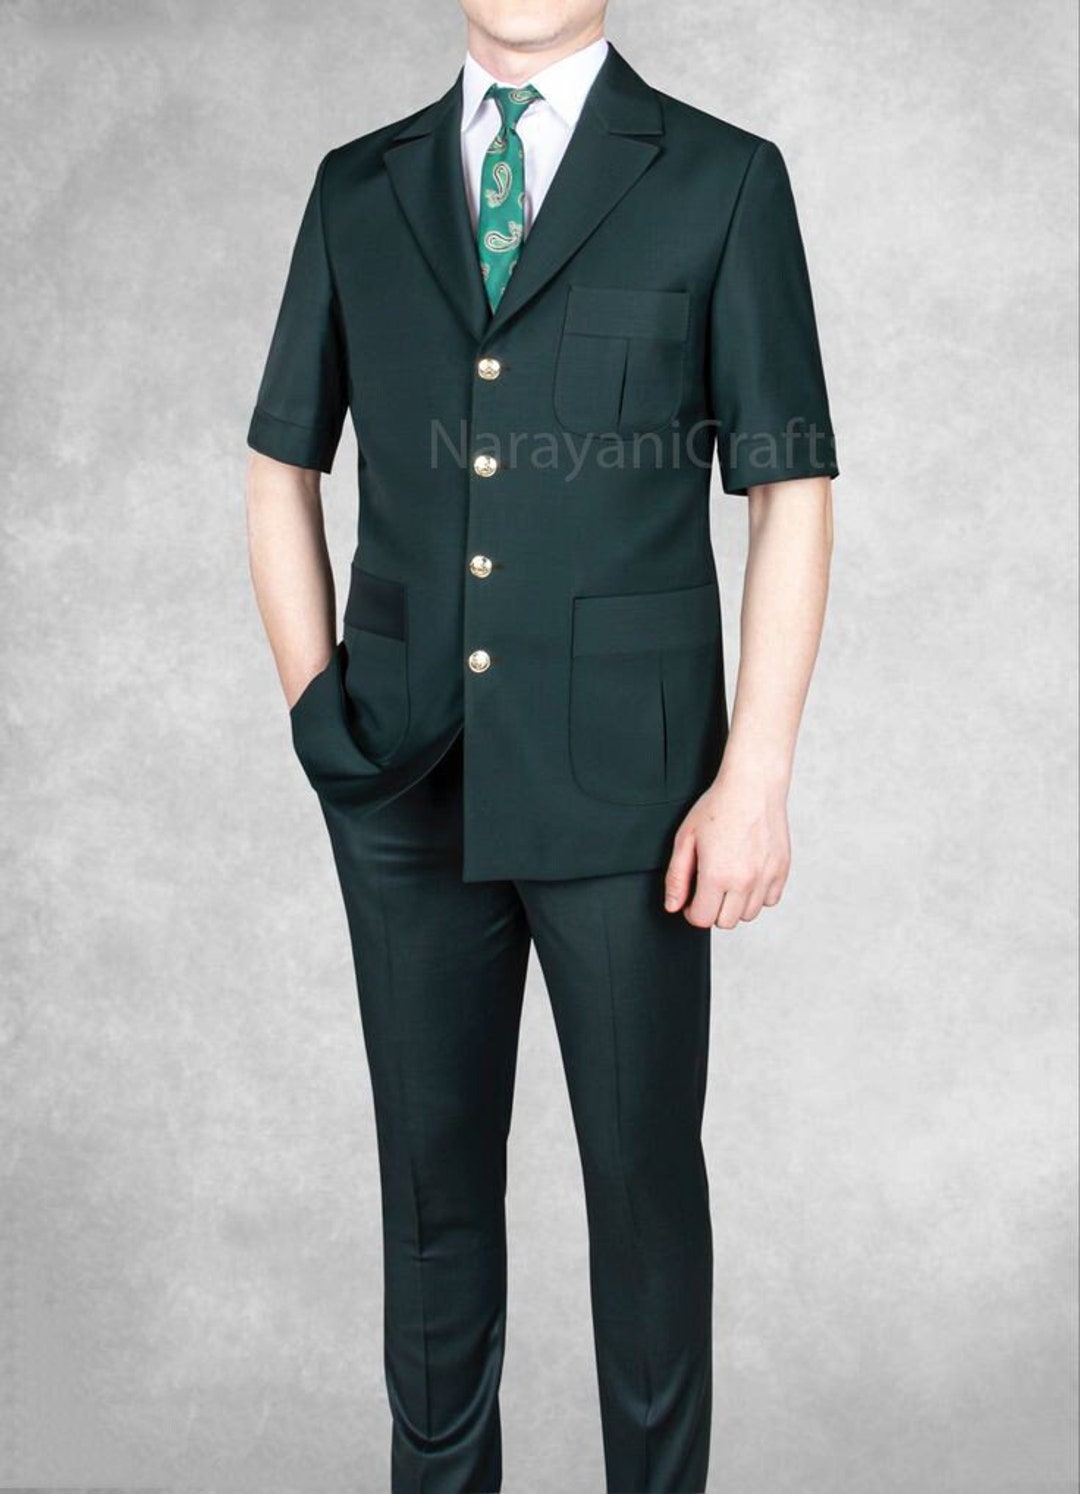 Handmade Decent Bottle Green Safari Suit for Men for Wedding and Events and  Party and Casual Wear -  Ireland